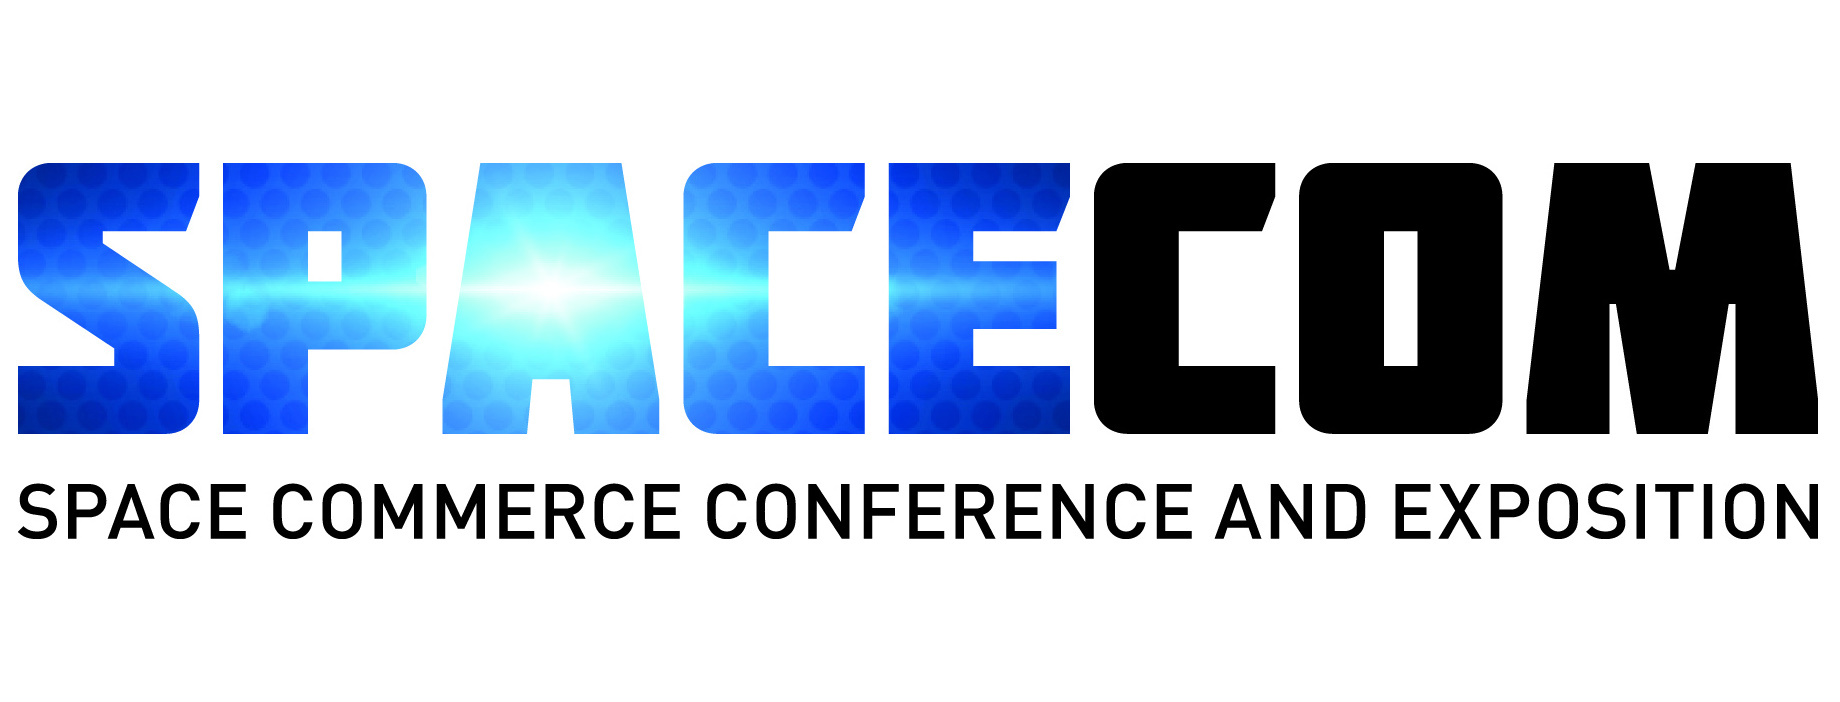 Space Commerce Conference and Exposition (SpaceCom)